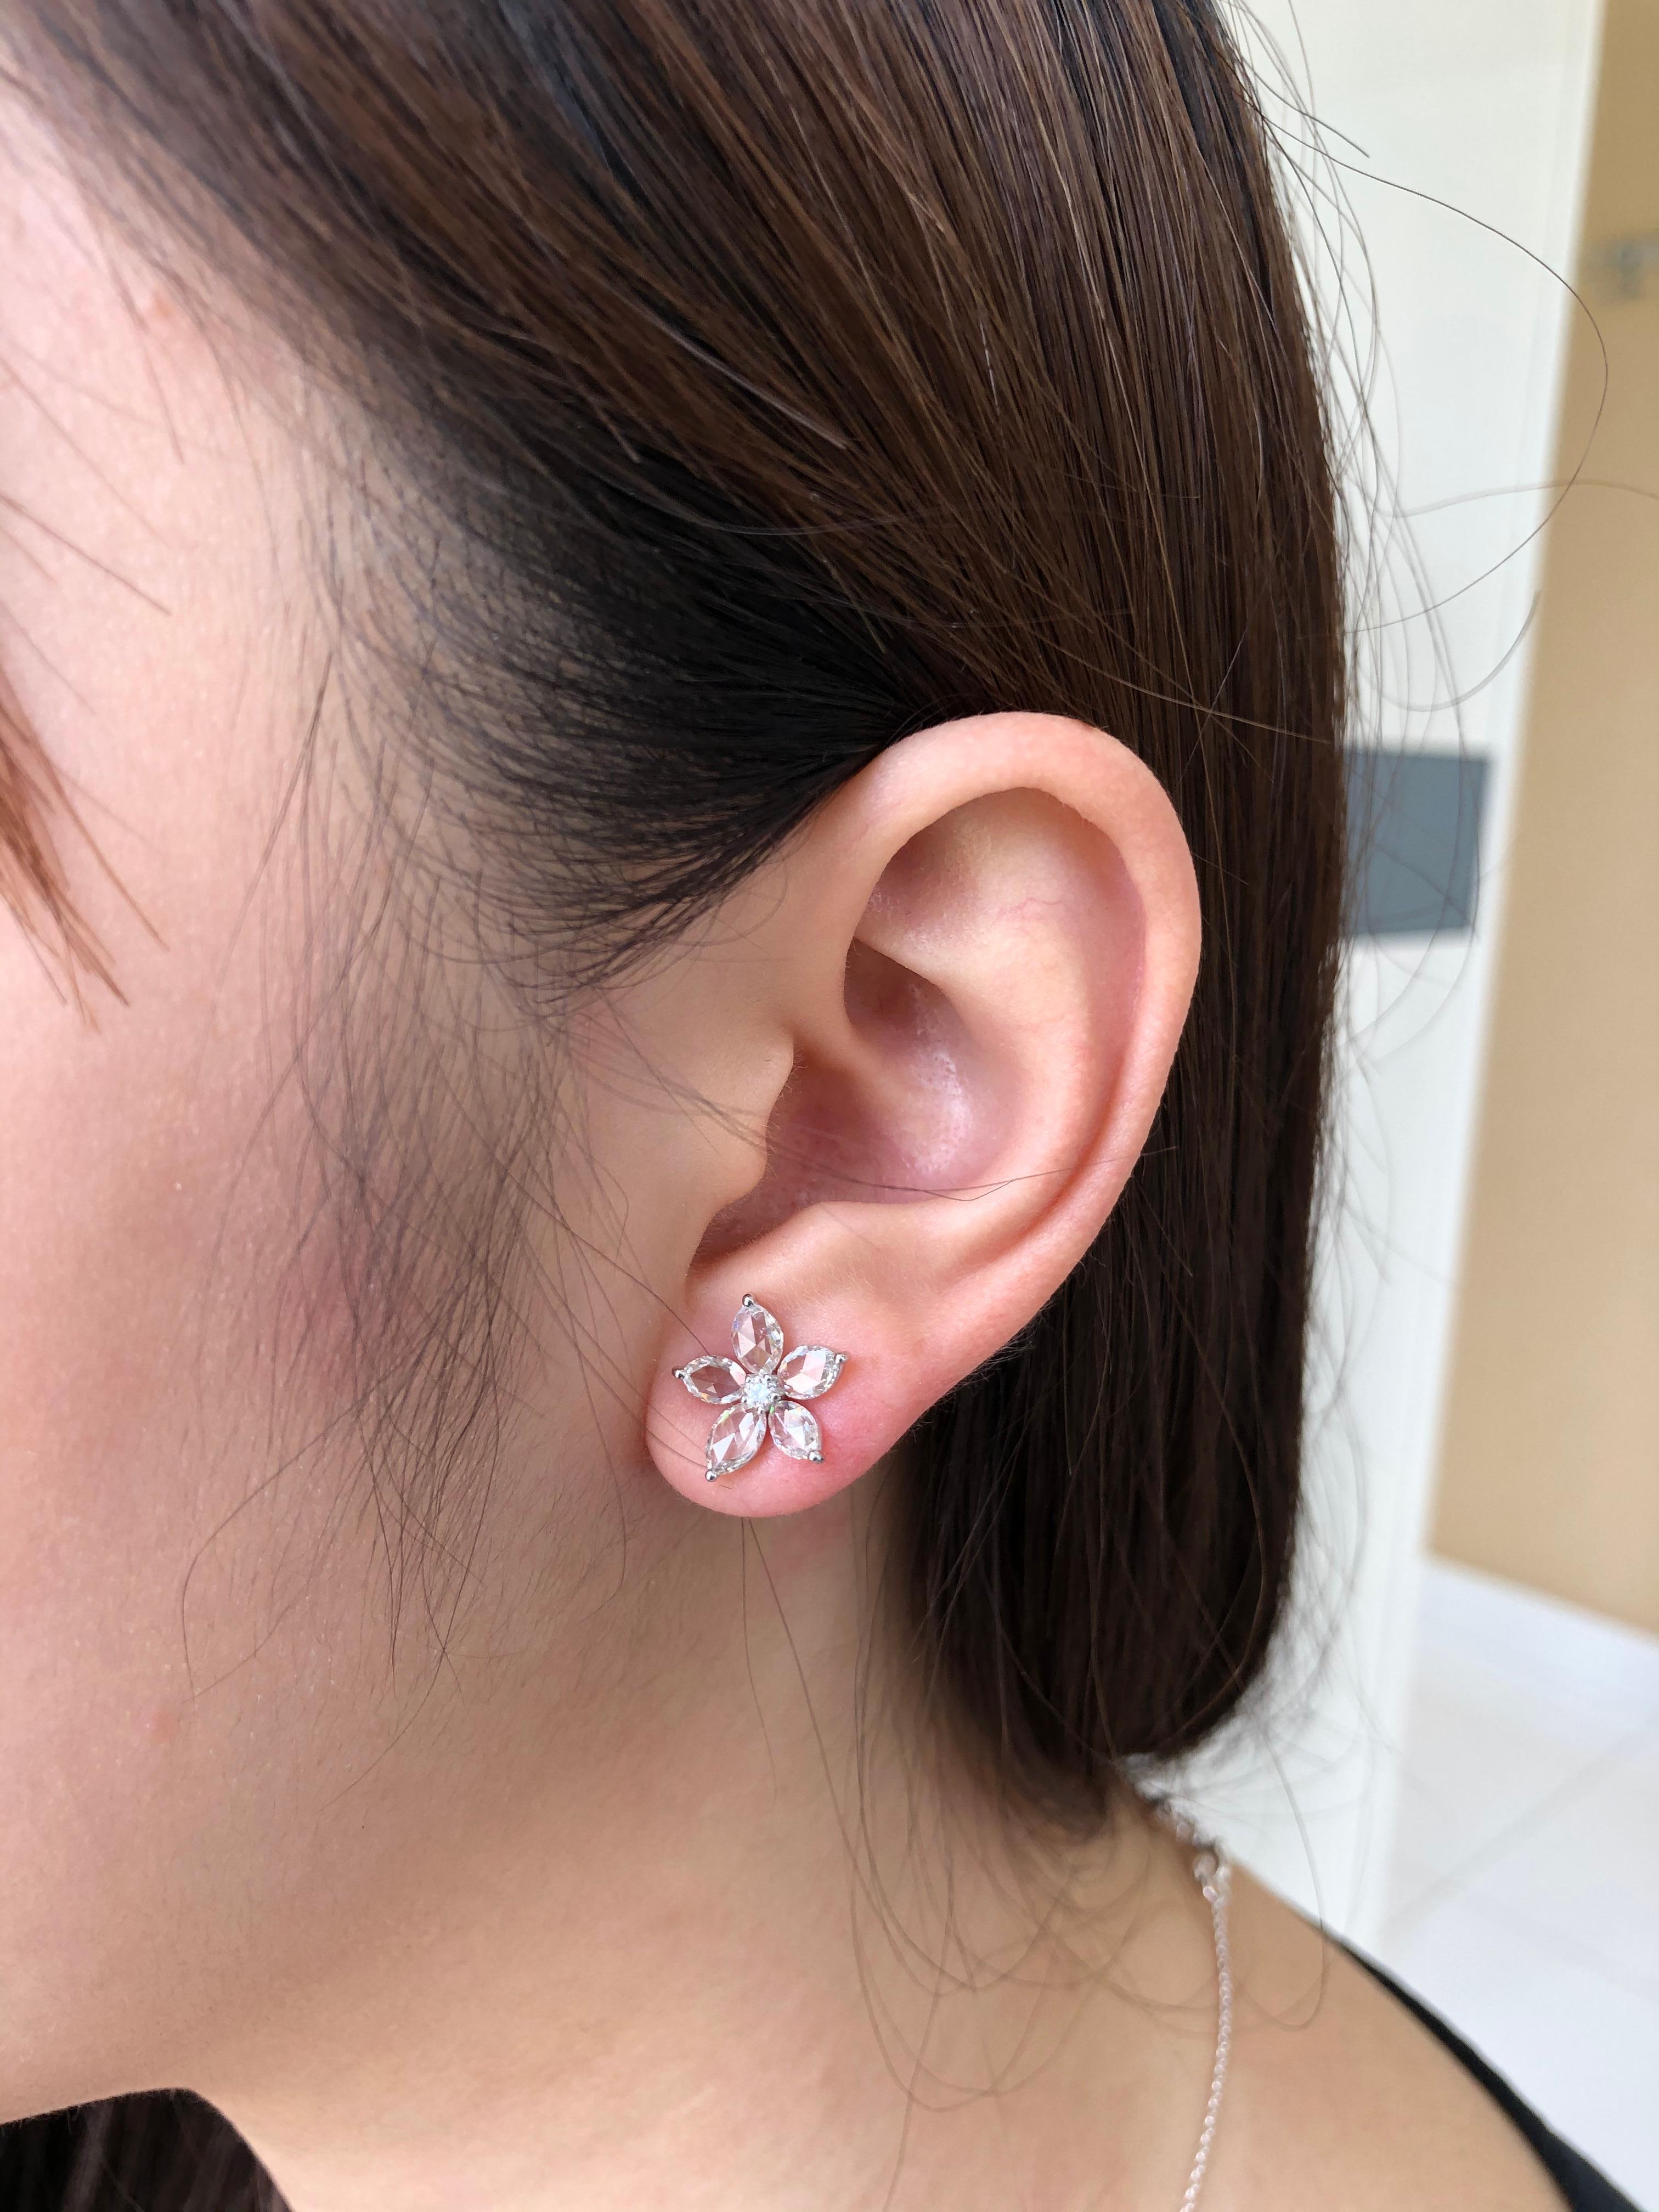 JR 2.17 Carat Rose Cut Diamond Flower 18 Karat White Gold Earring

Flowers made of White Diamond  rose cut earring is simple and for daily wear. Its beauty is unmatched for.

Addition details or Video upon request.